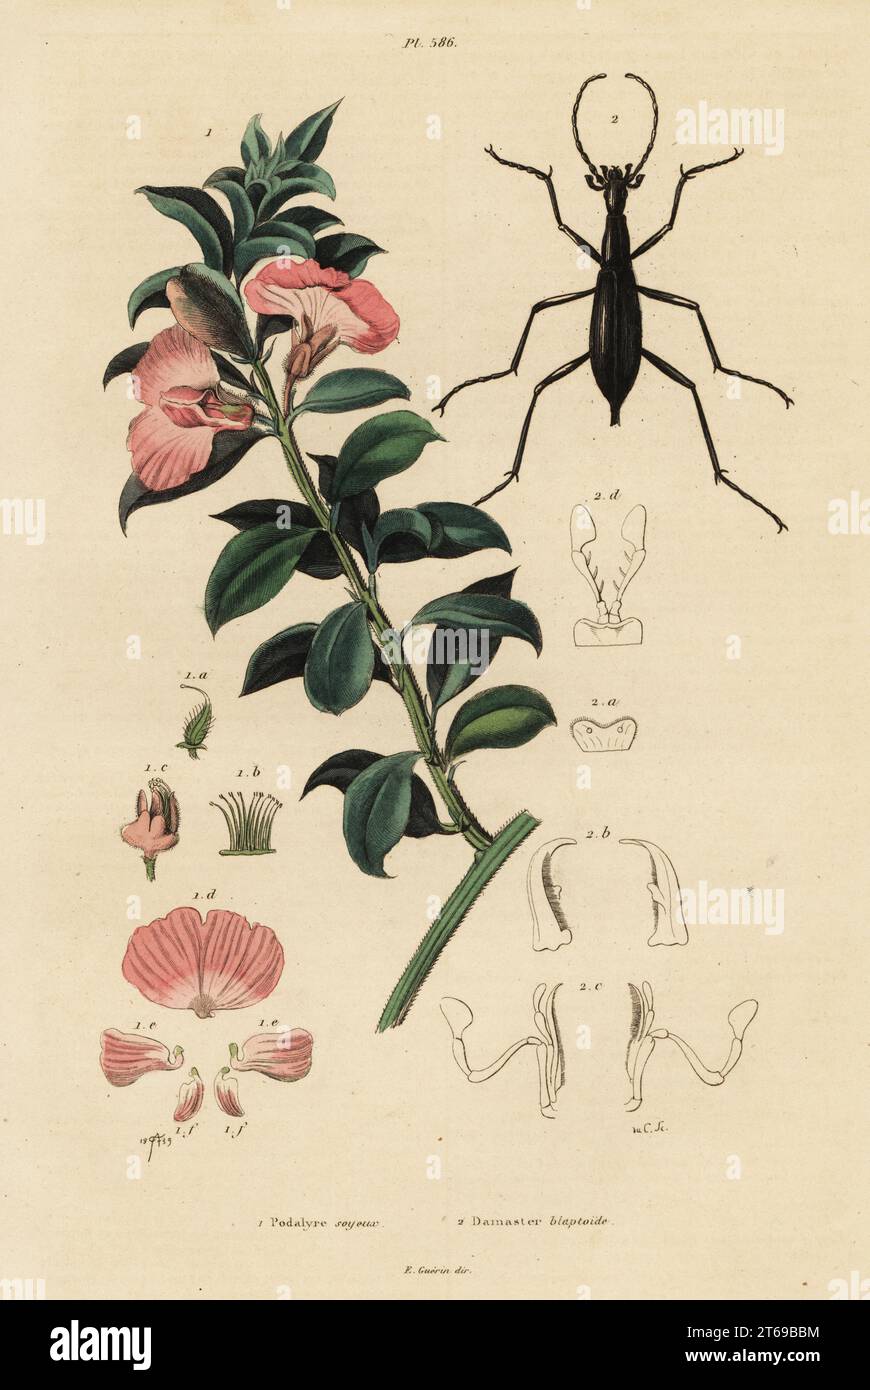 Cape satin bush, Podalyria sericea, and beetle, Carabus blaptoides (Damaster blaptoides). Handcoloured steel engraving by du Casse after an illustration by Adolph Fries from Felix-Edouard Guerin-Meneville's Dictionnaire Pittoresque d'Histoire Naturelle (Picturesque Dictionary of Natural History), Paris, 1834-39. . Stock Photo